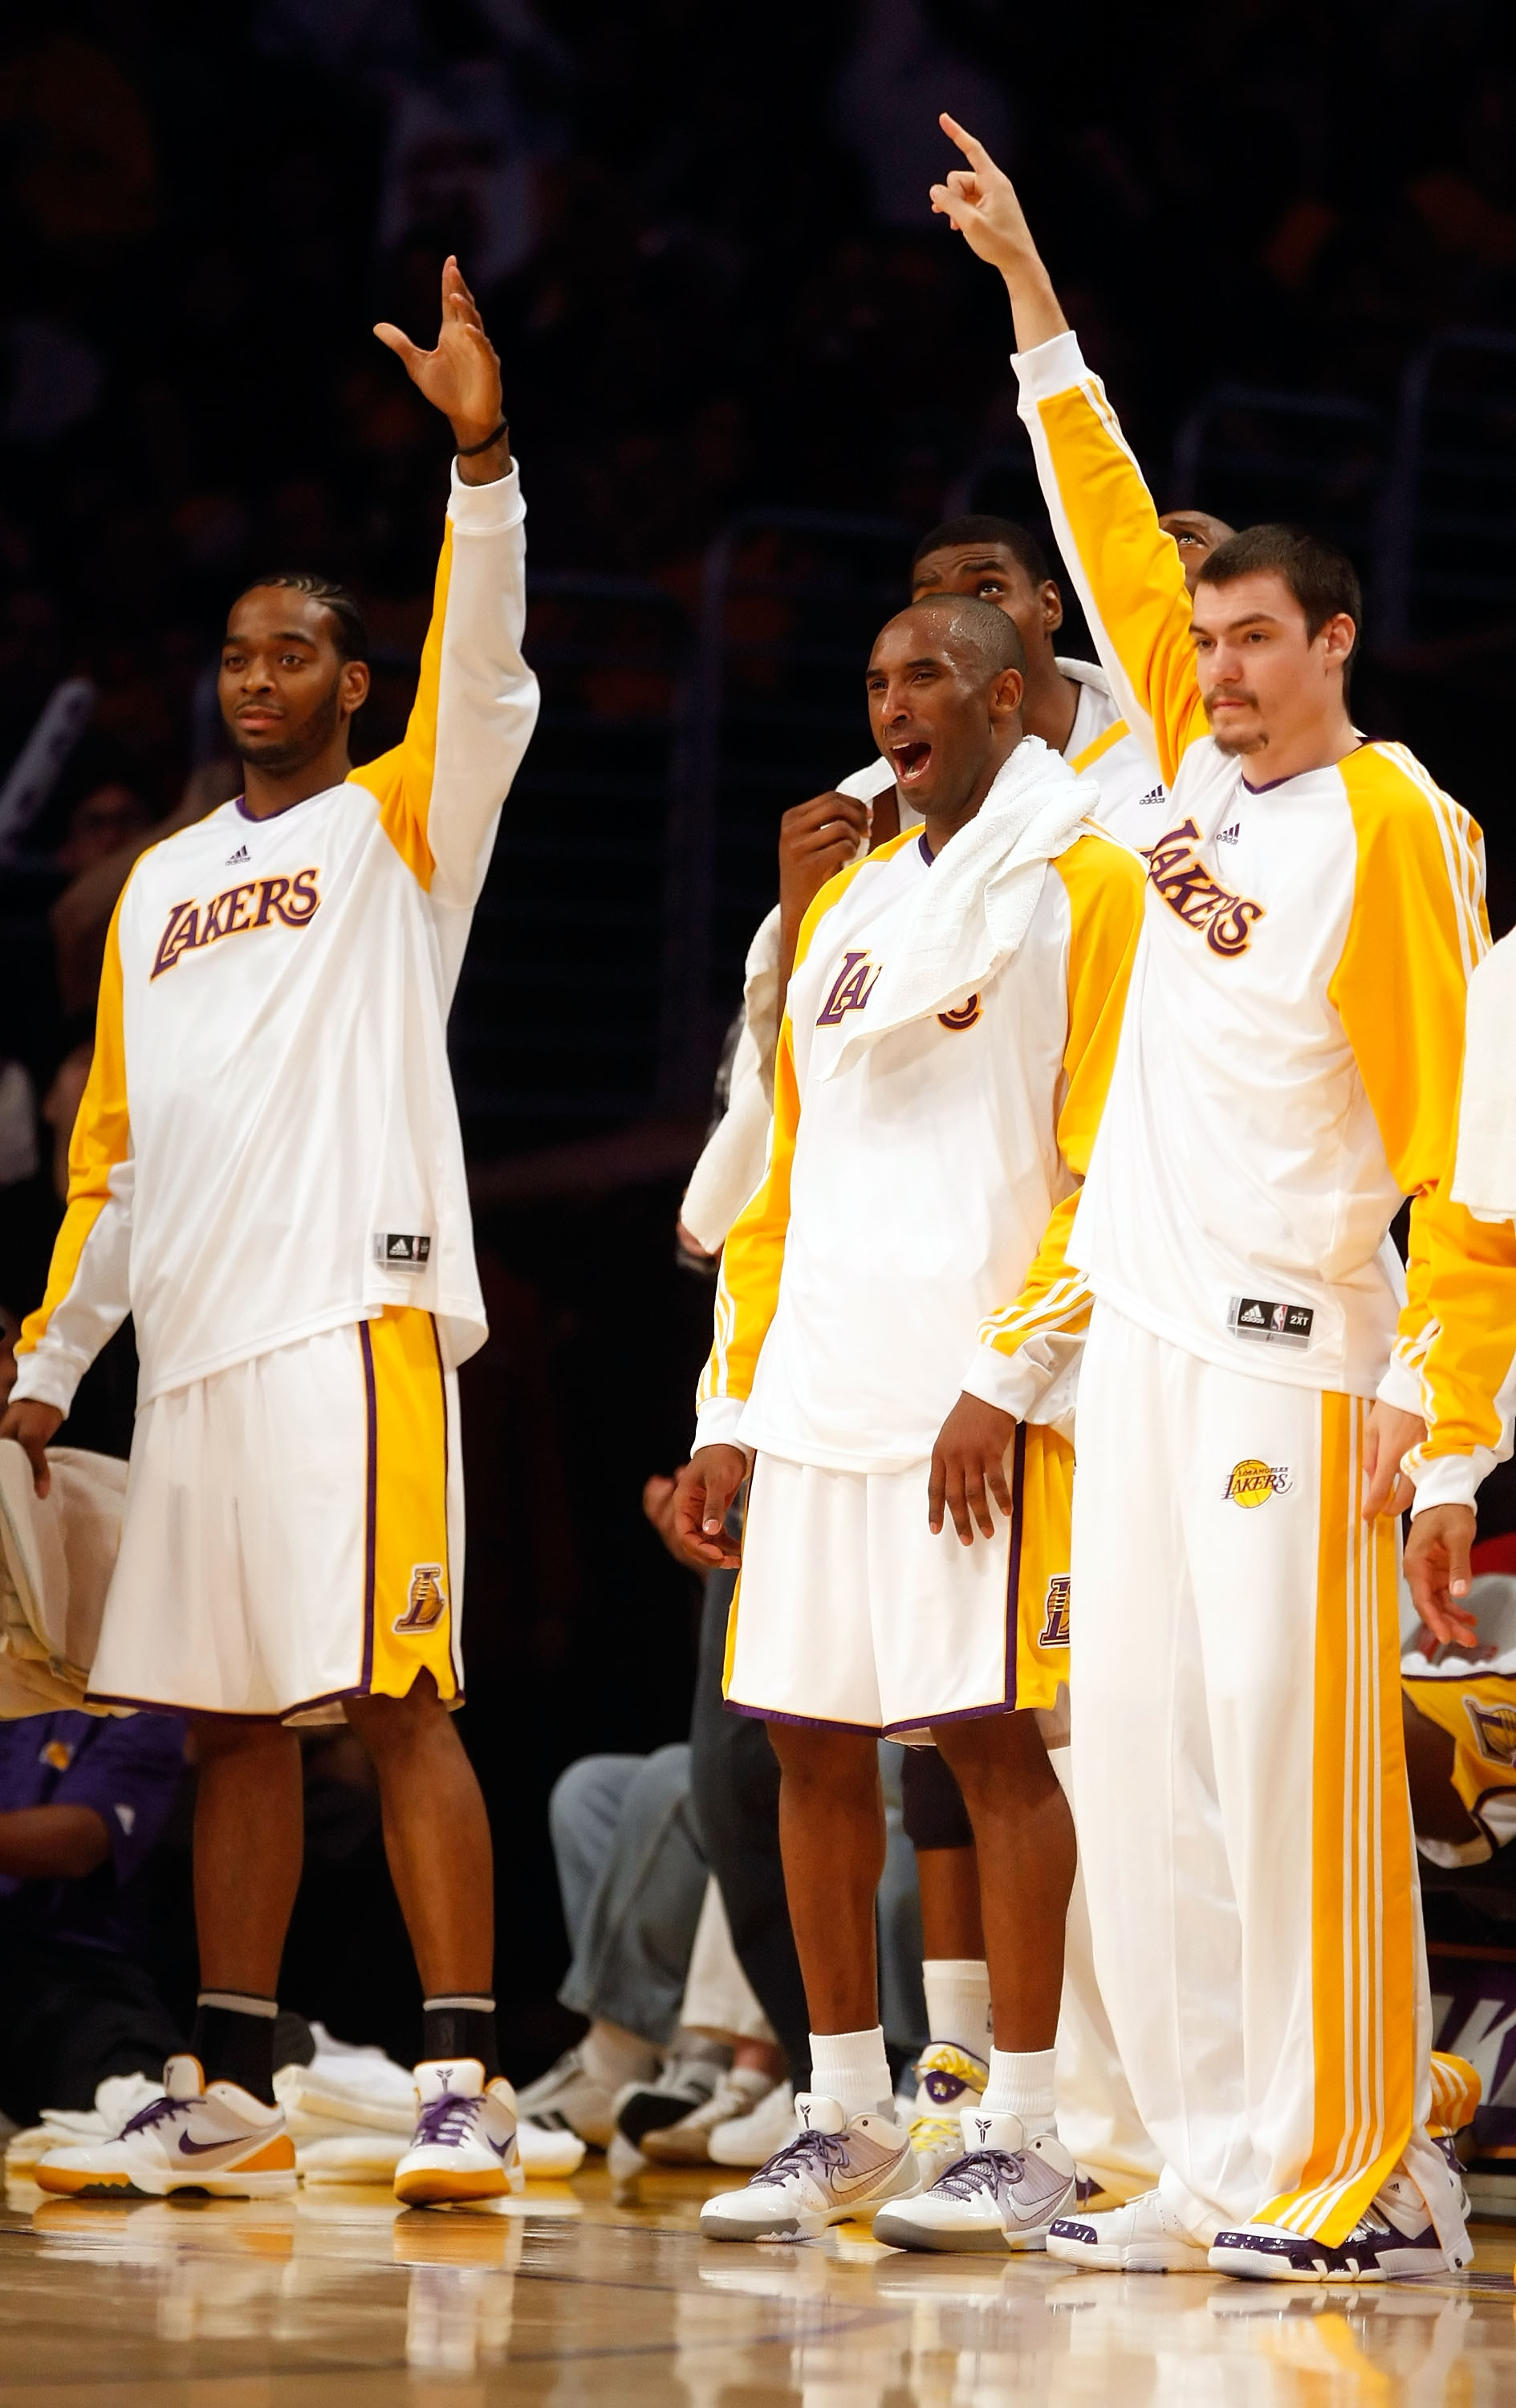 Lakers News: Adam Morrison Reflects On Playing With Kobe Bryant